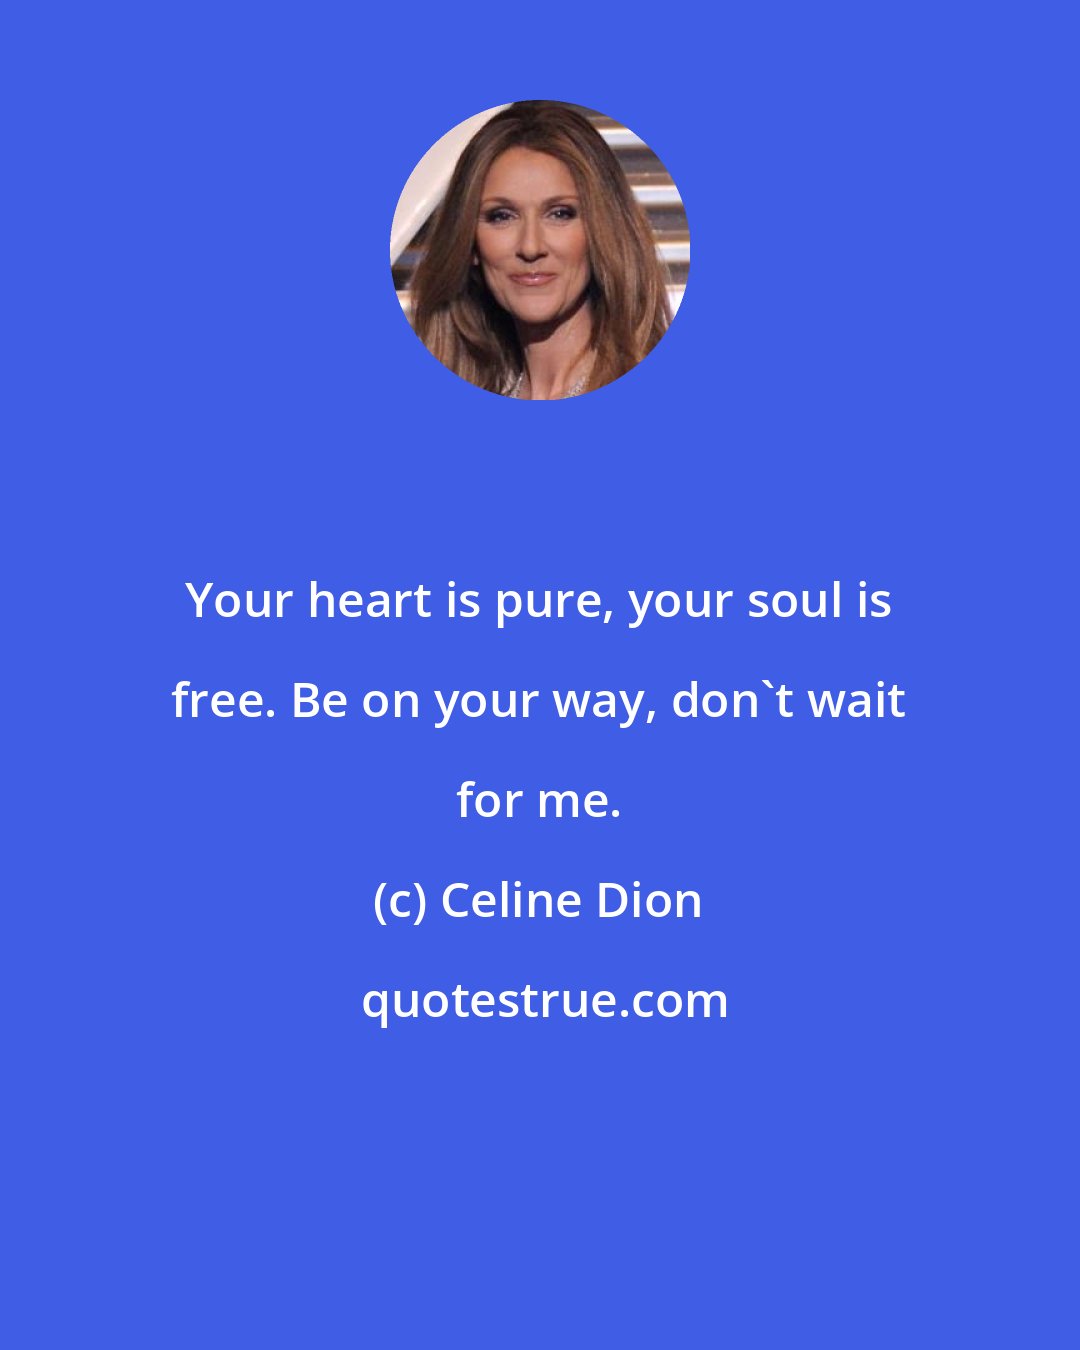 Celine Dion: Your heart is pure, your soul is free. Be on your way, don't wait for me.